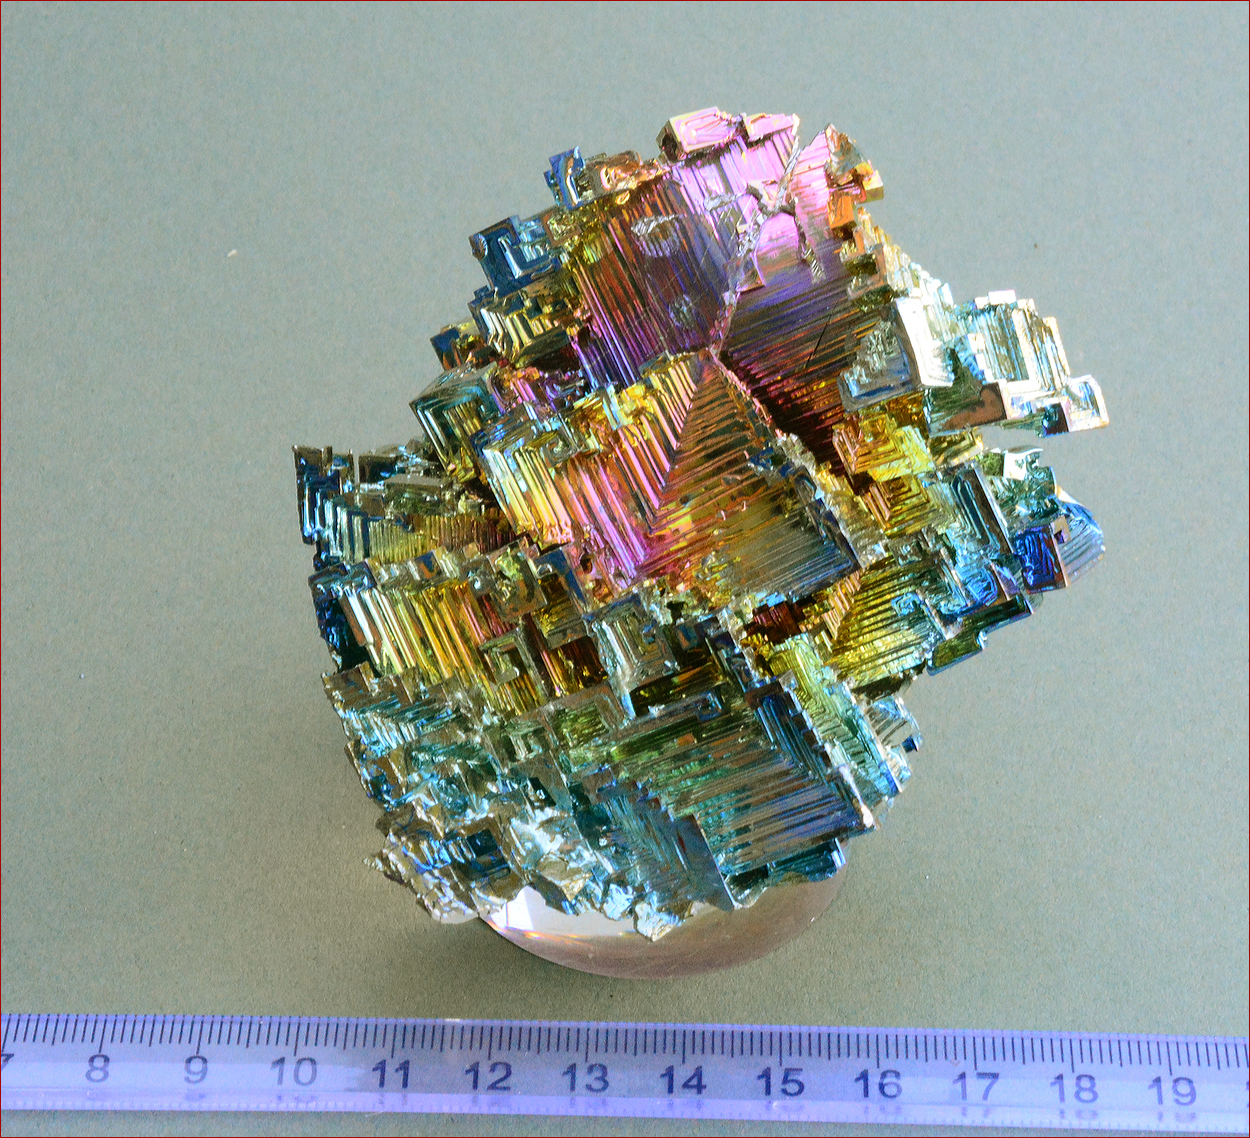 Very large piece of ‘architectural’ bizmuth crystals. Superb colours.